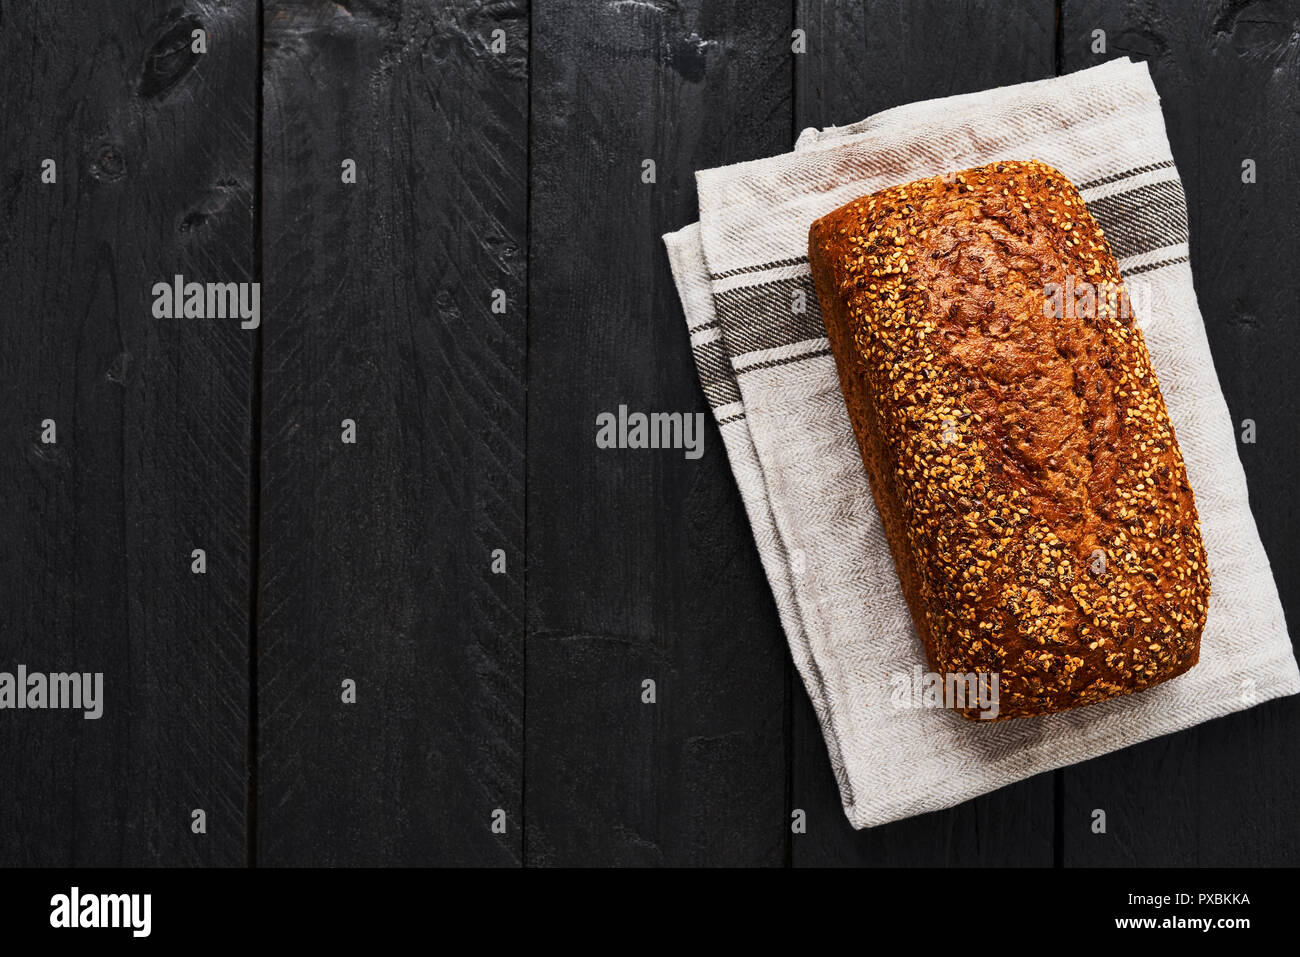 Loaf of whole wheat bread on gray dishtowel over black wooden table. Top view with copy space. Stock Photo